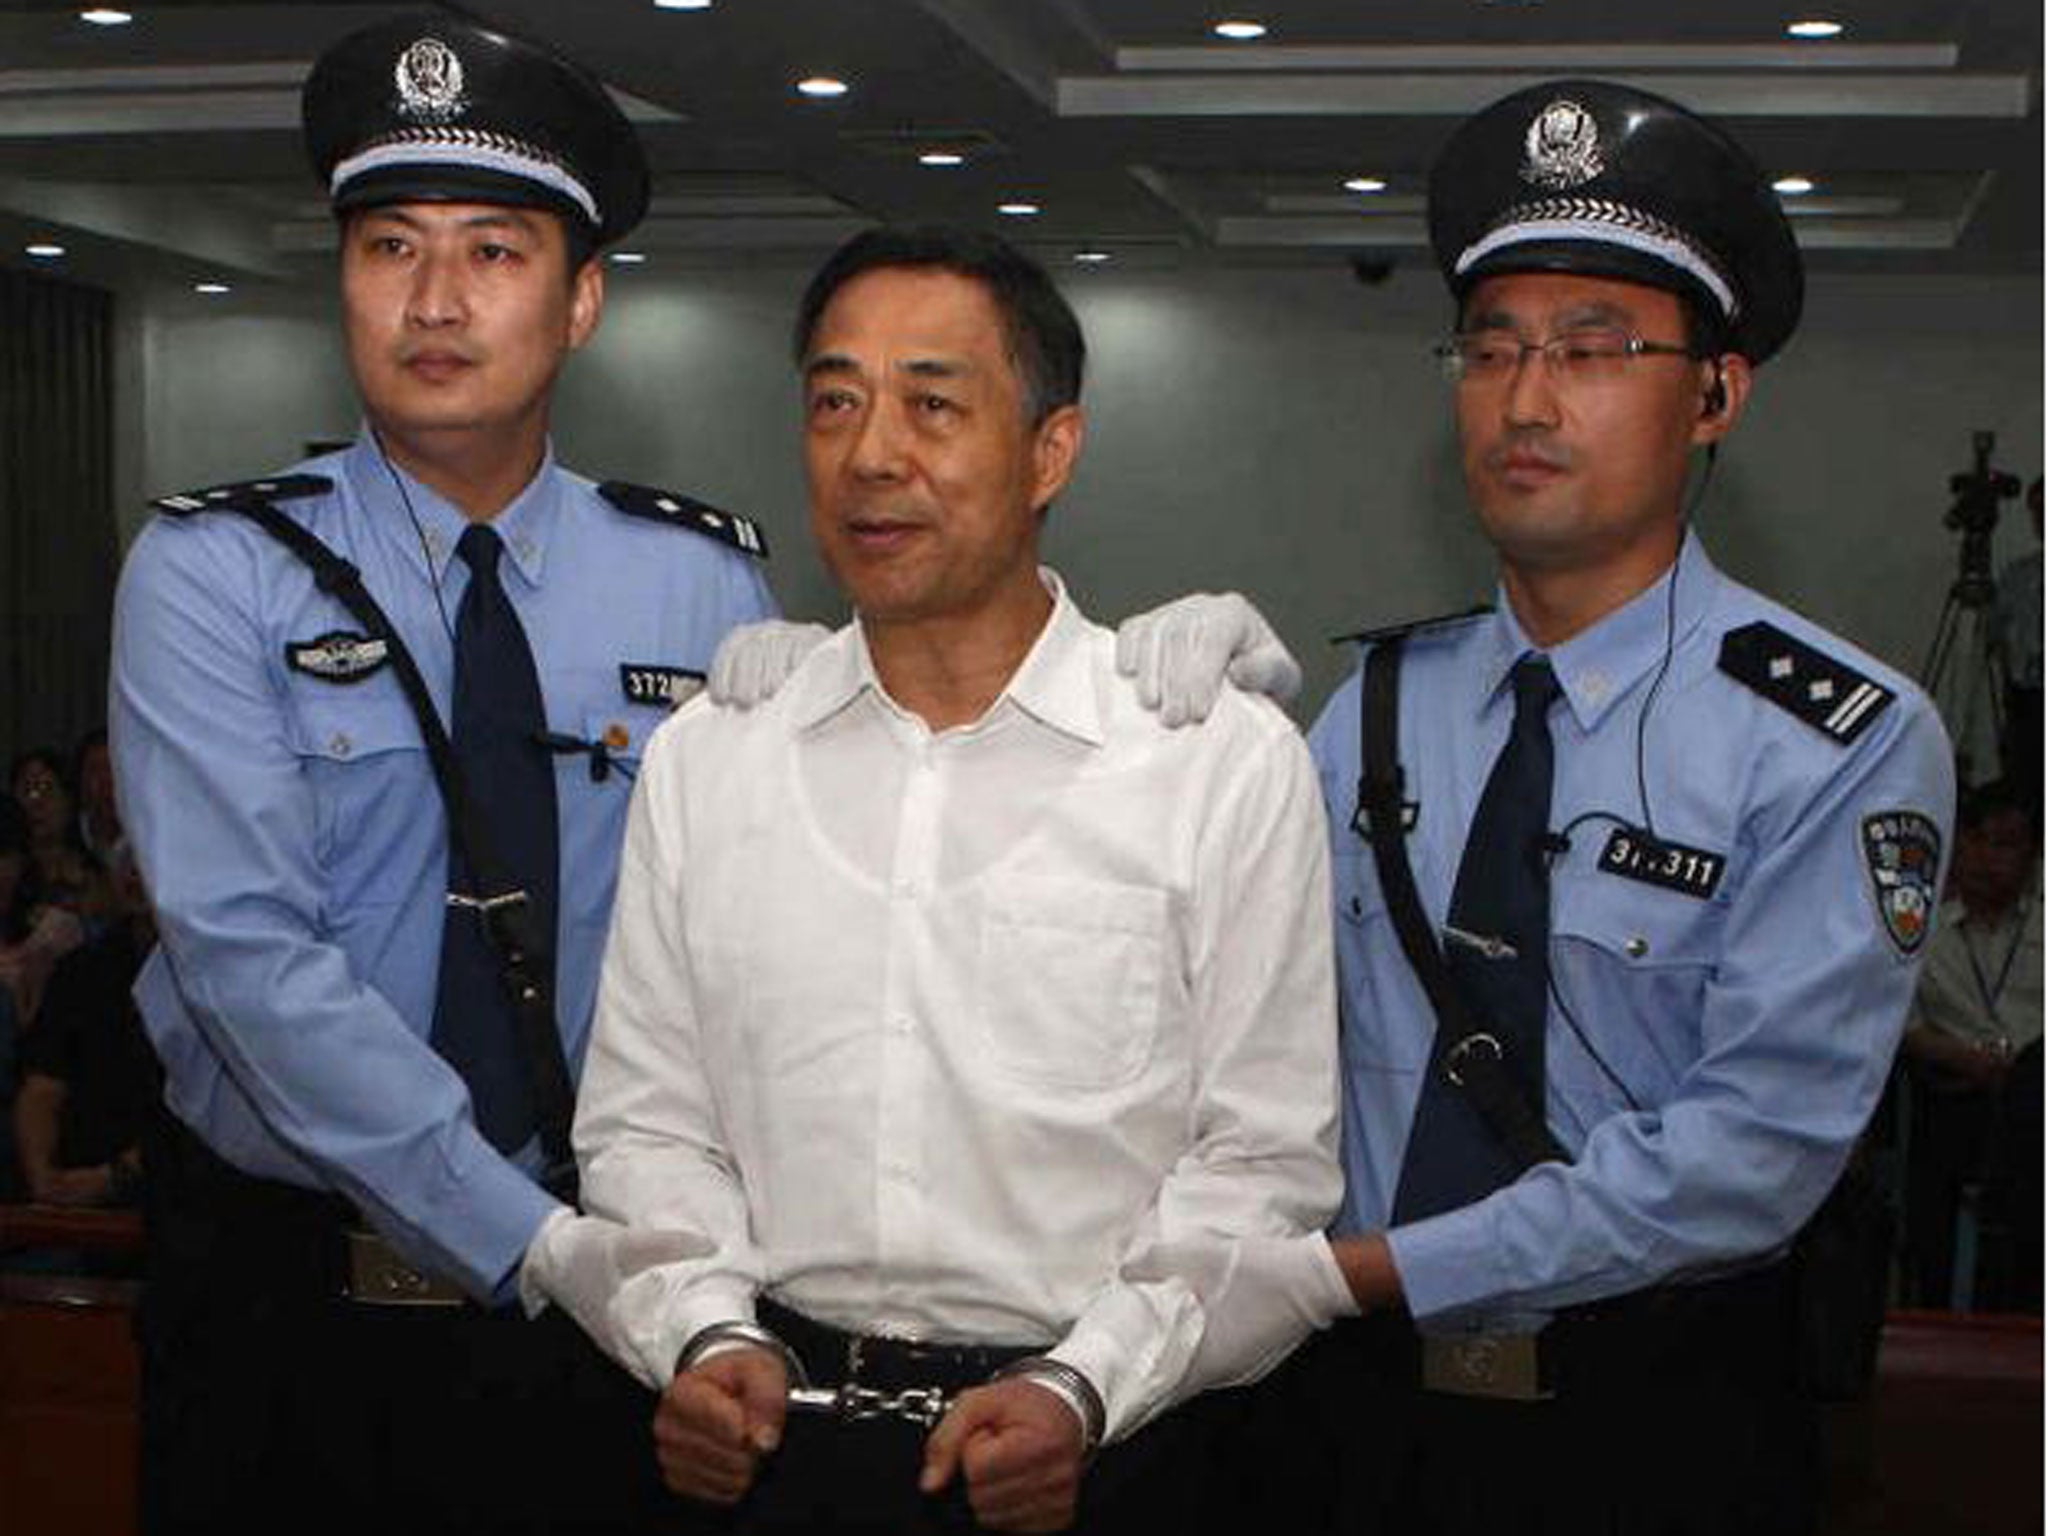 The former party chief of Chongqing has been given a life sentence after being found guilty of corruption